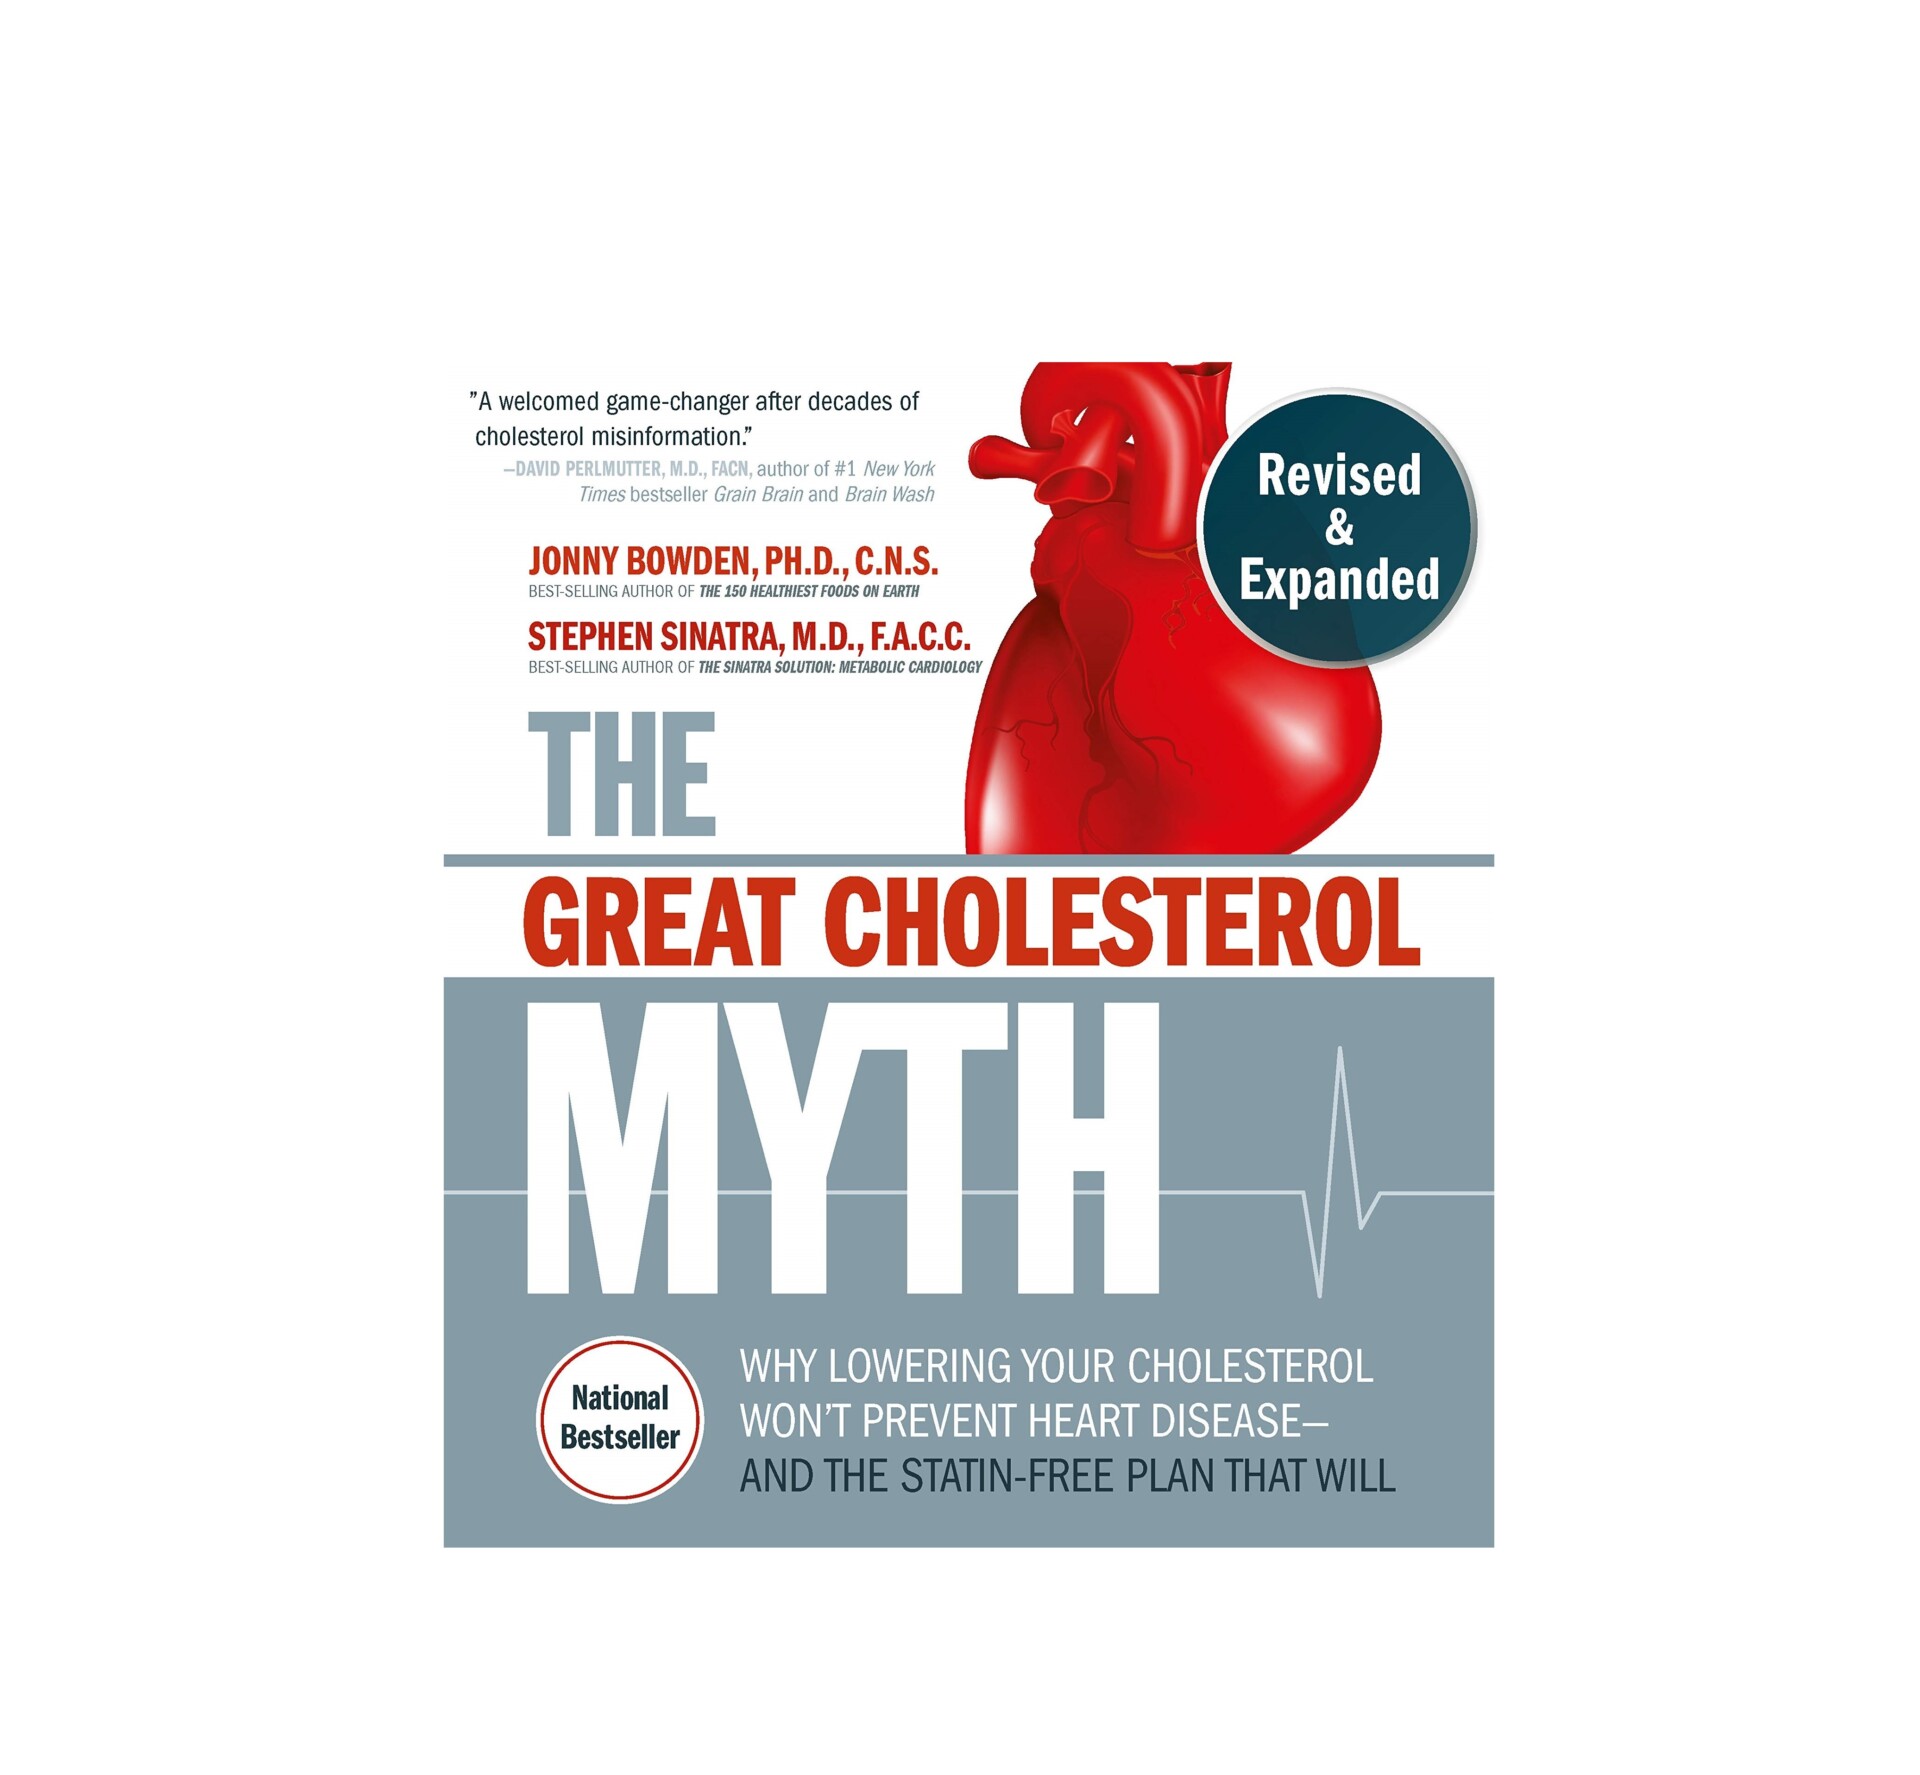 The Great Cholesterol Myth book by Dr. Sinatra and Johnny Bowden 2020 Revised and Expanded version